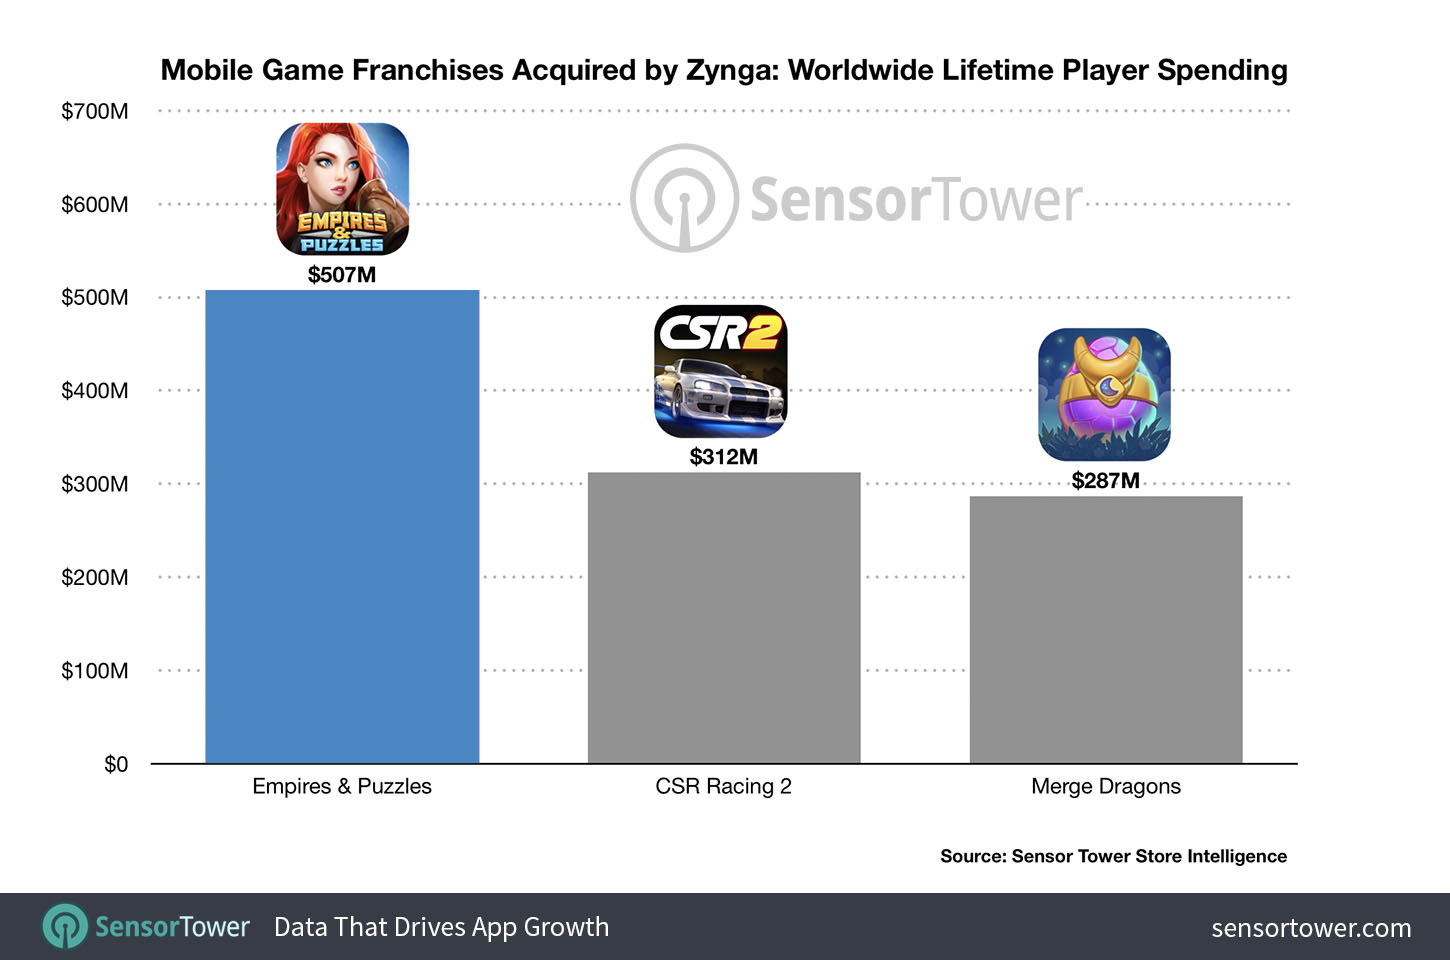 Mobile Game Franchises Acquired by Zynga by Worldwide Lifetime Player Spending